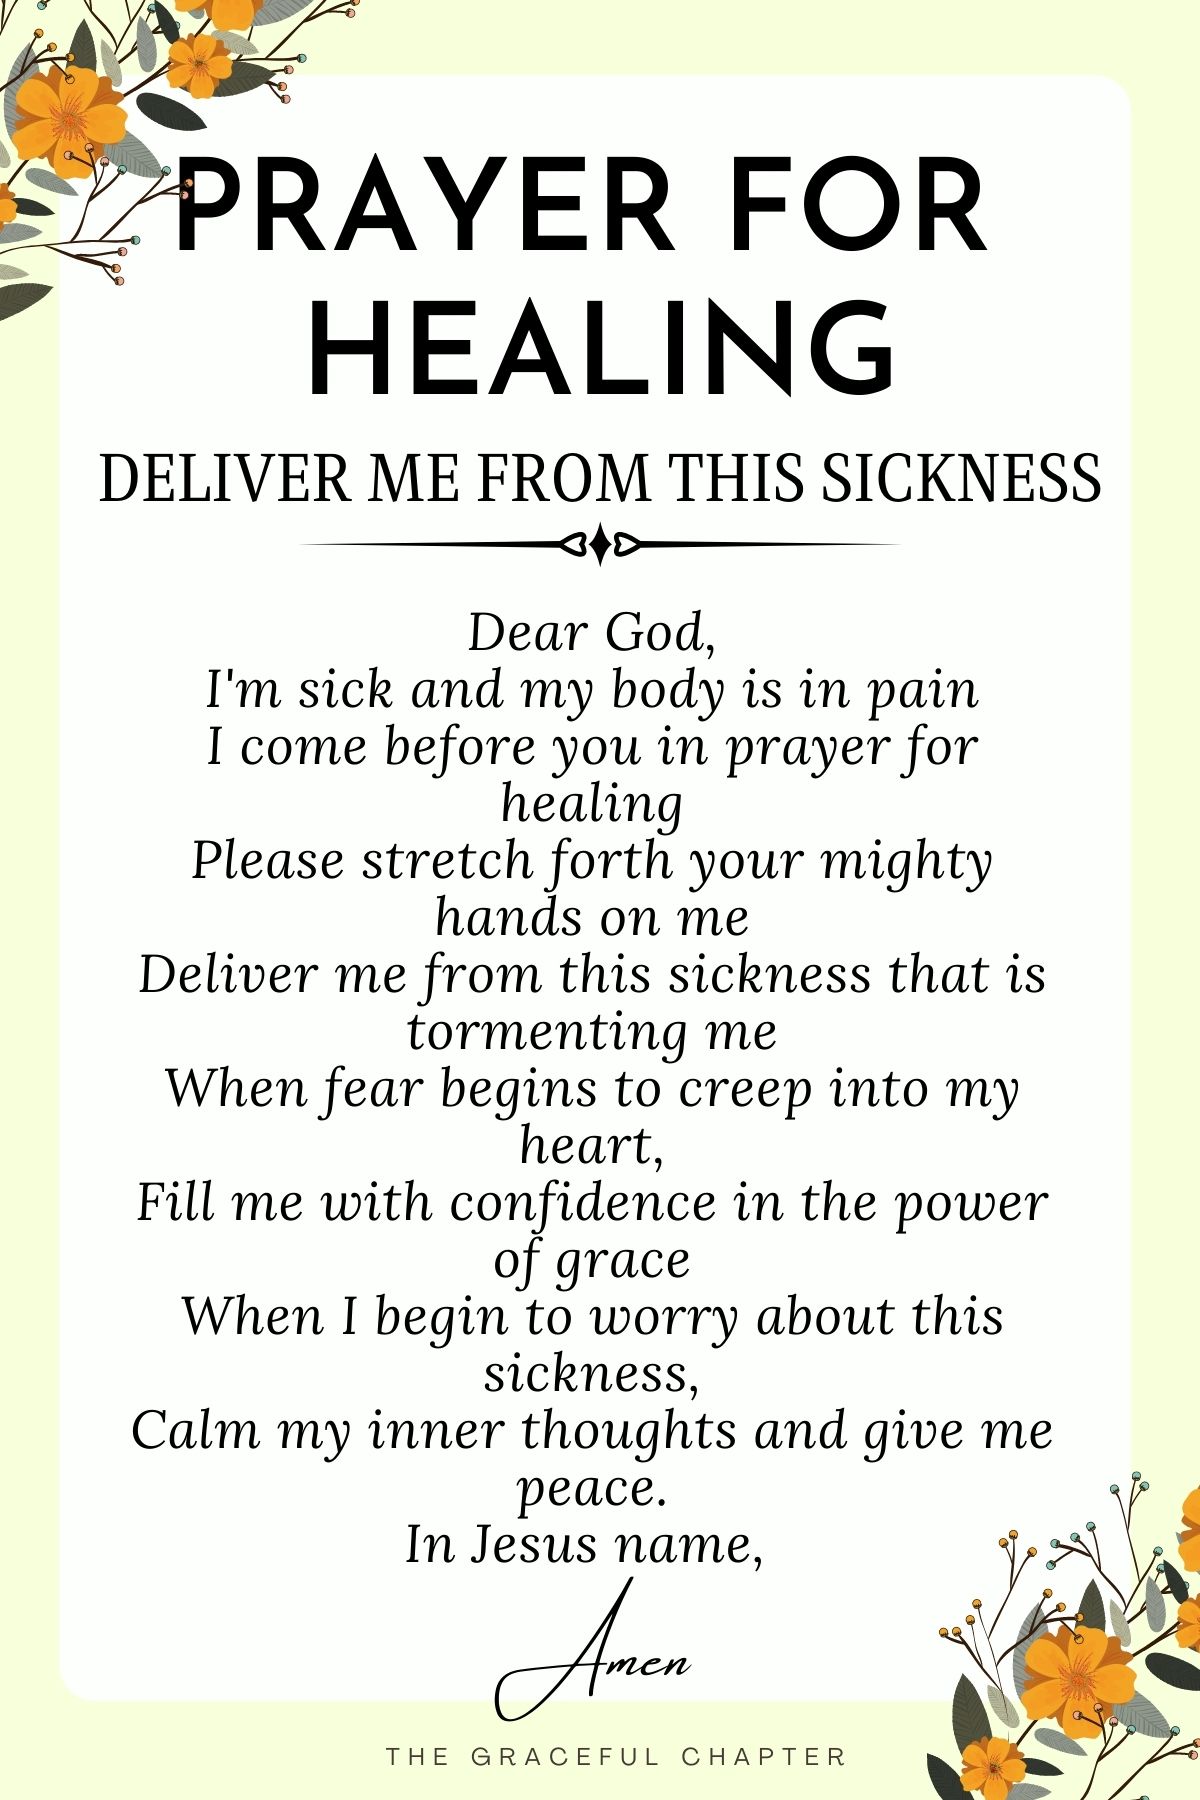 Healing Prayer - Deliver me from this sickness